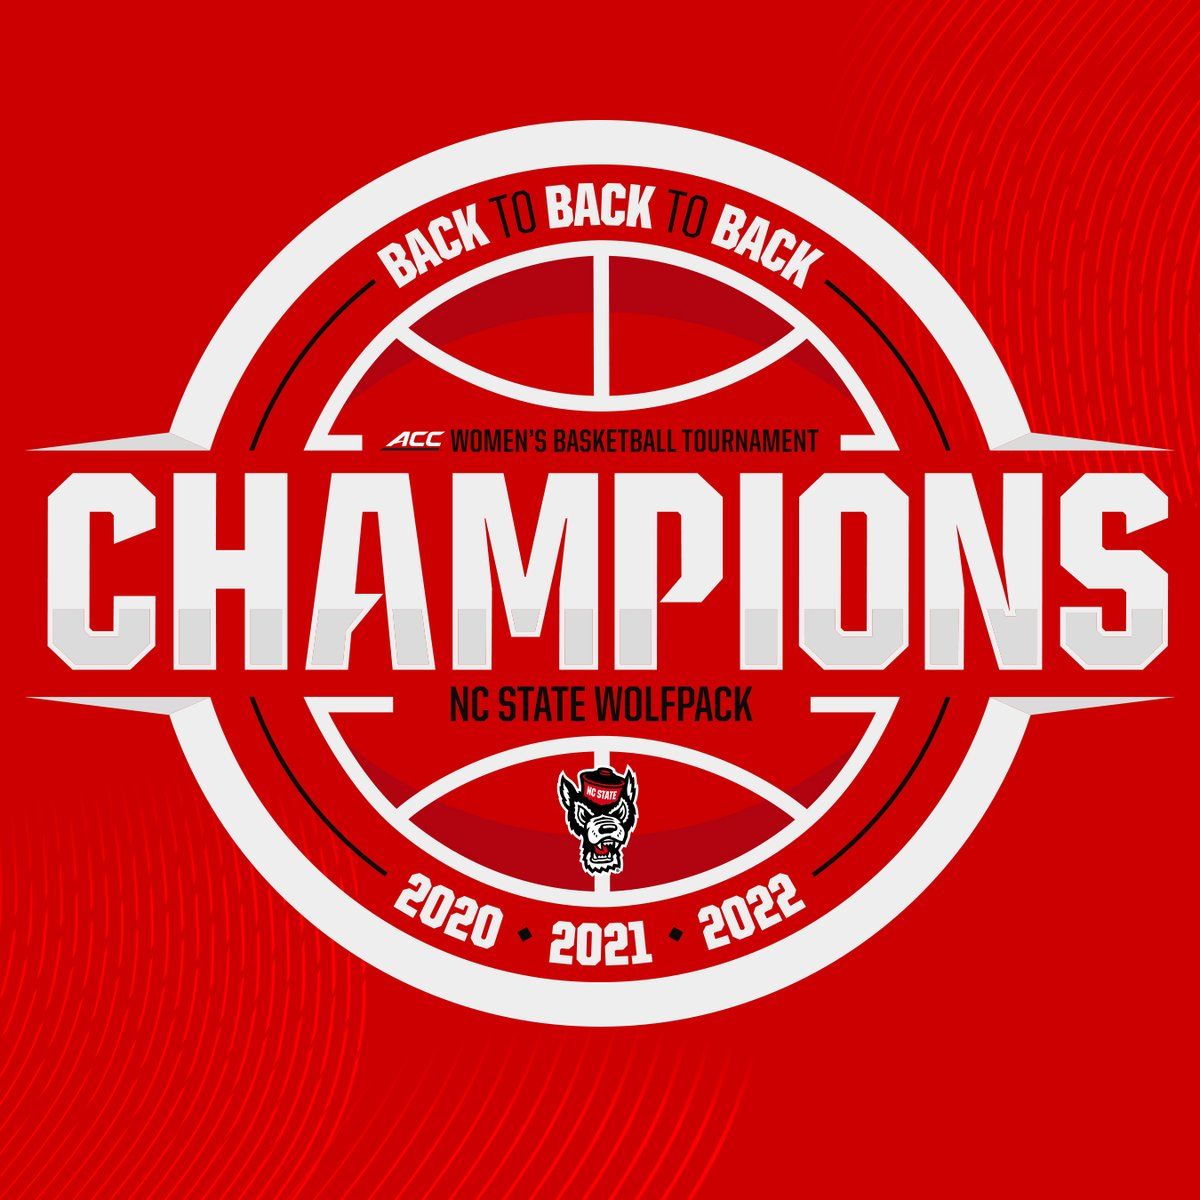 Picture Courtesy of NC State Athletics